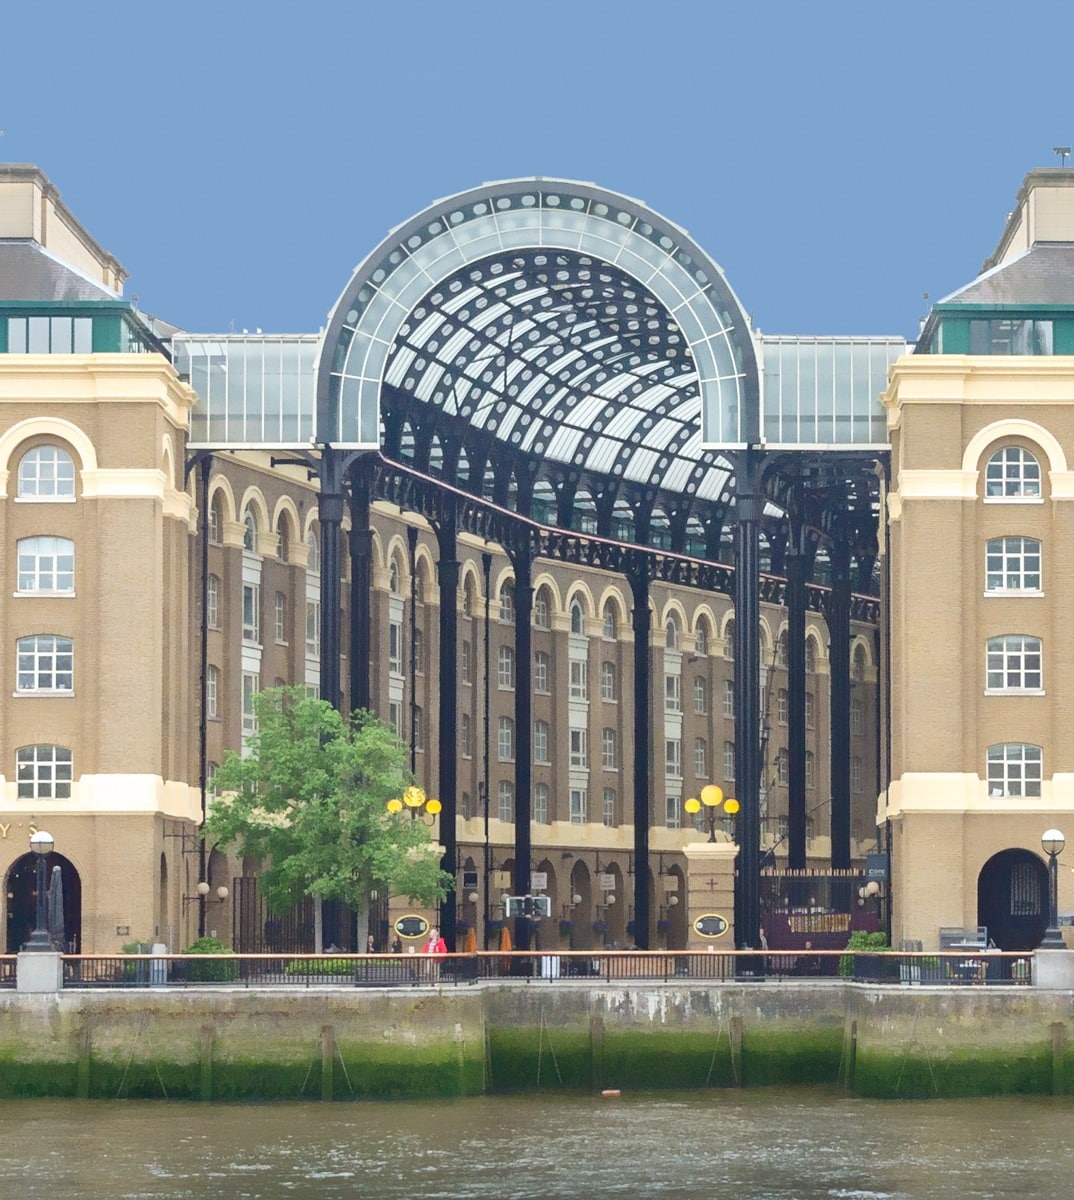 This is a view of the Hay's Galleria facade on the south bank of the Thames River, across from the City of London.